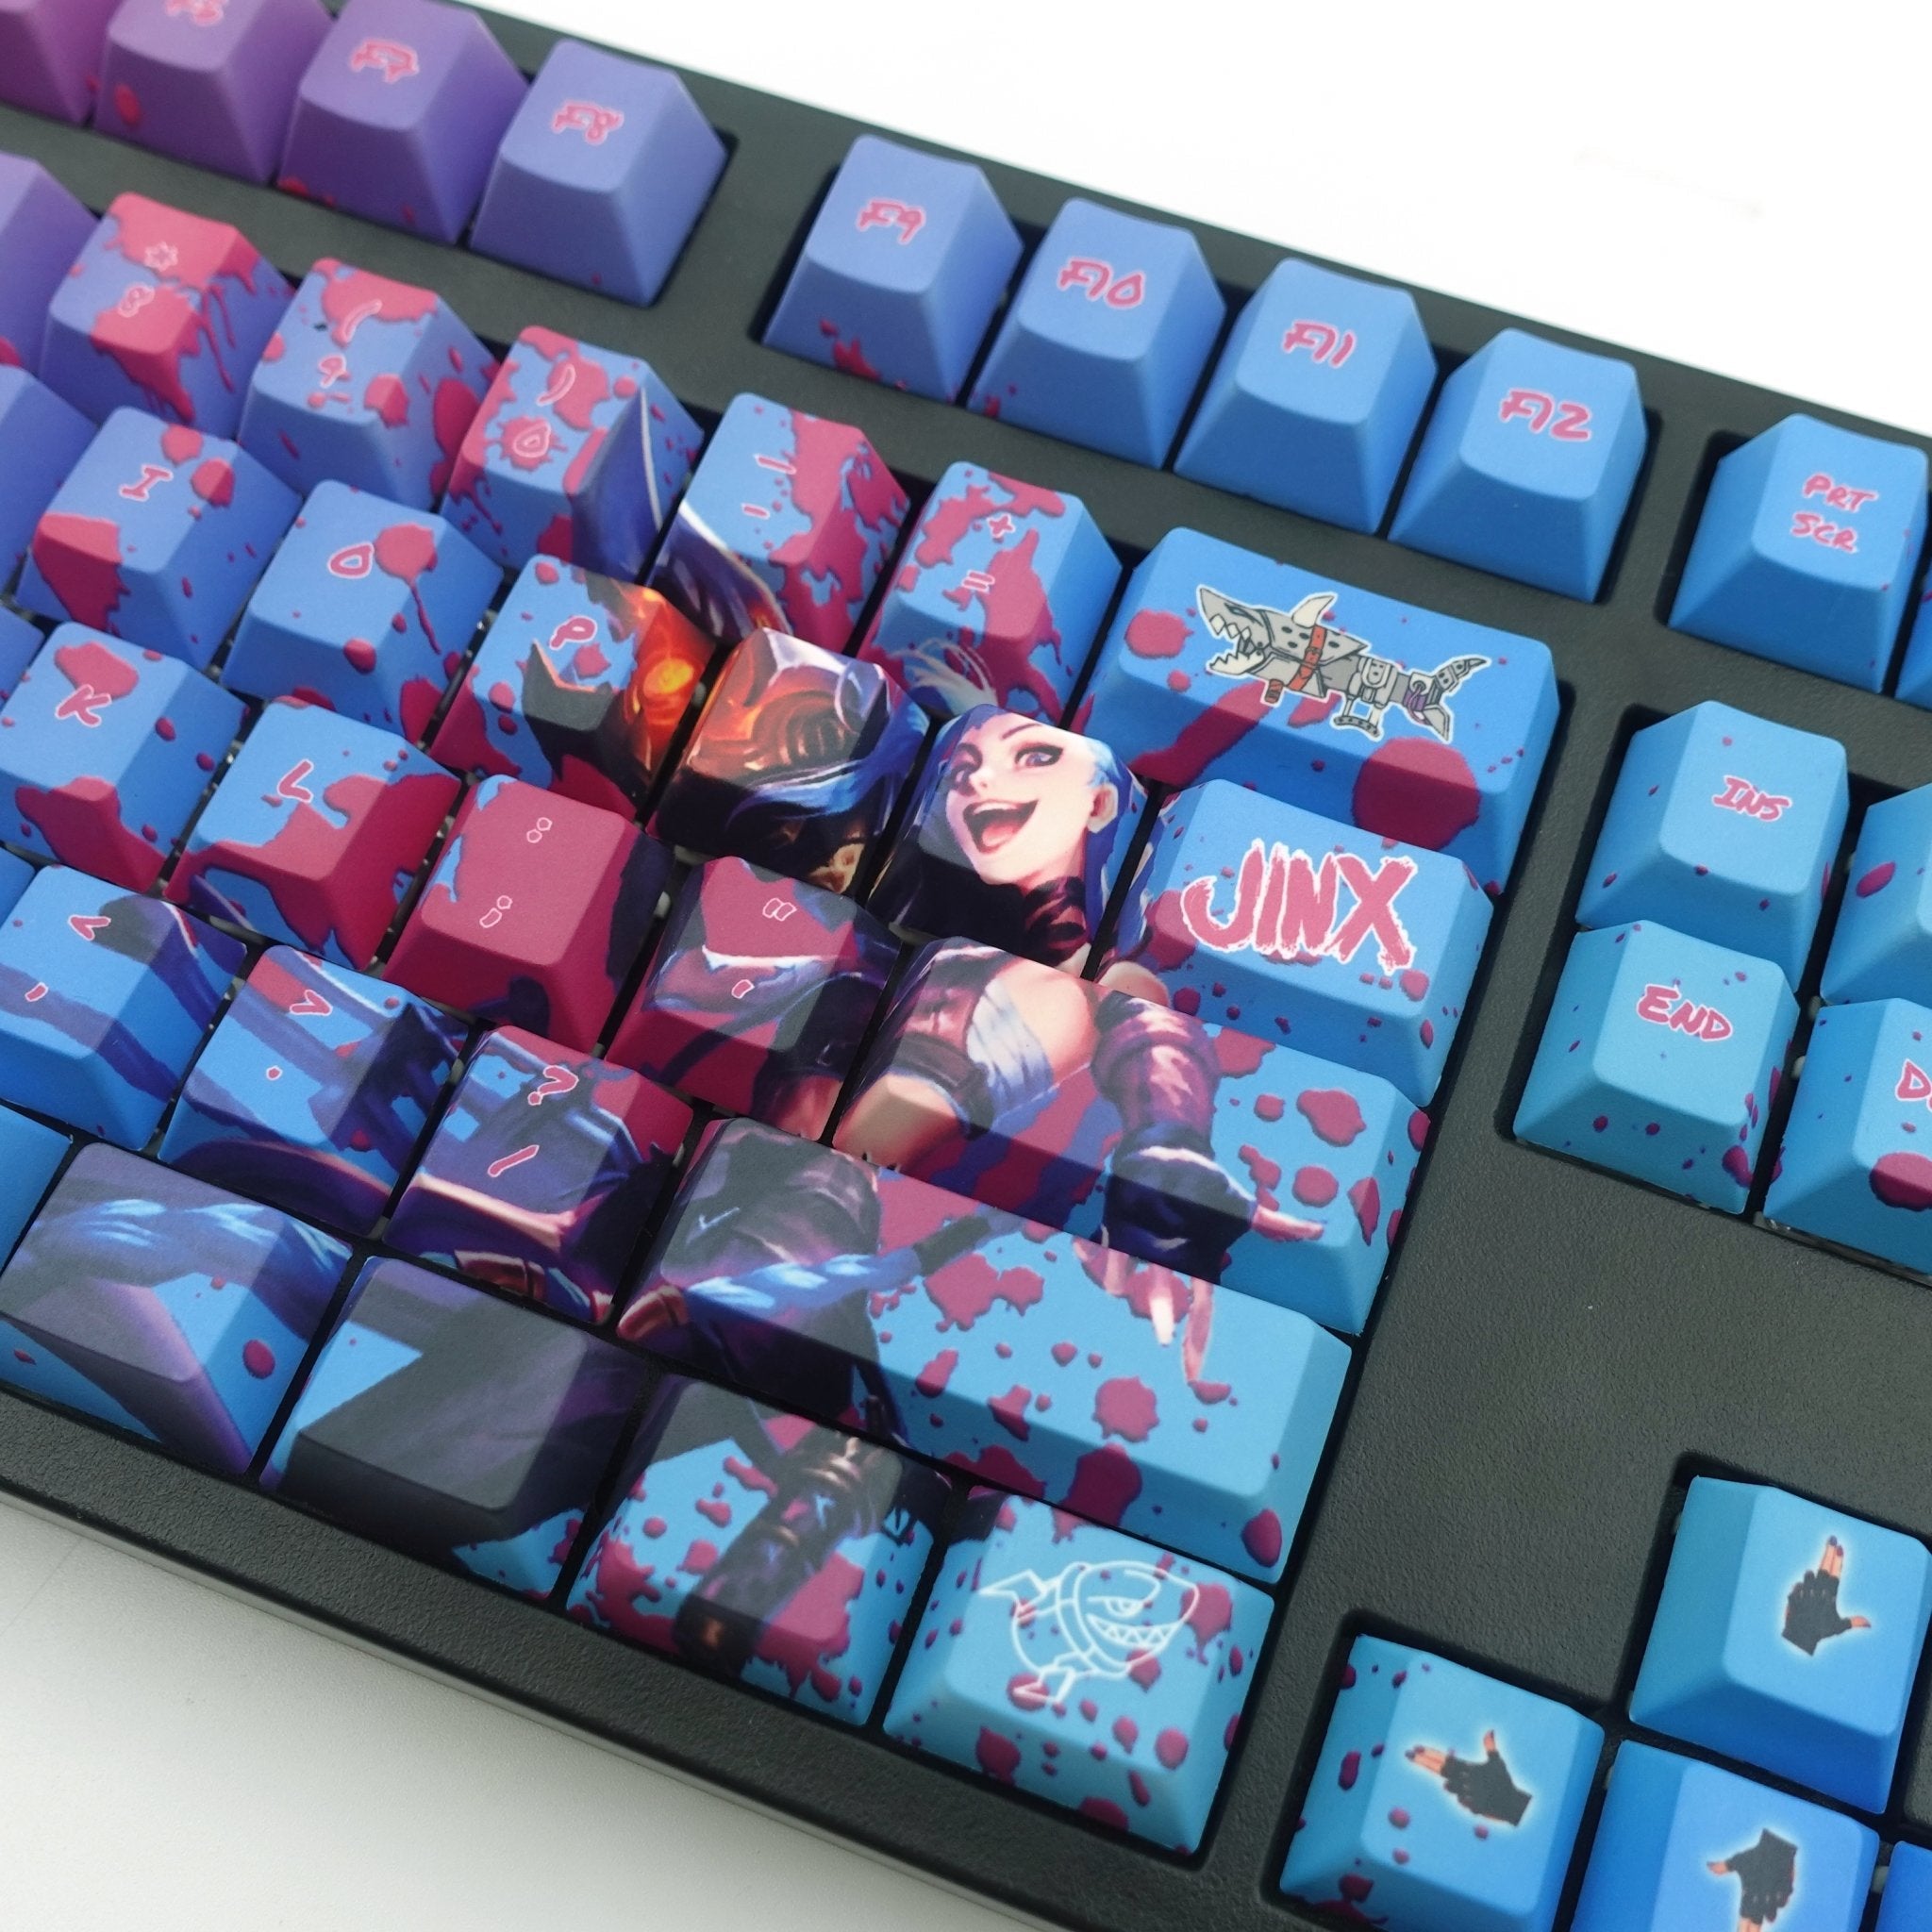 Hokeyio Japanese Anime Keycaps 108 PBT Dye Sublimation Crystalline  Character OEM Profile for Cherry Mx Gateron Kailh Switch Mechanical  Keyboard(Colorful keycaps 2) : Amazon.in: Computers & Accessories